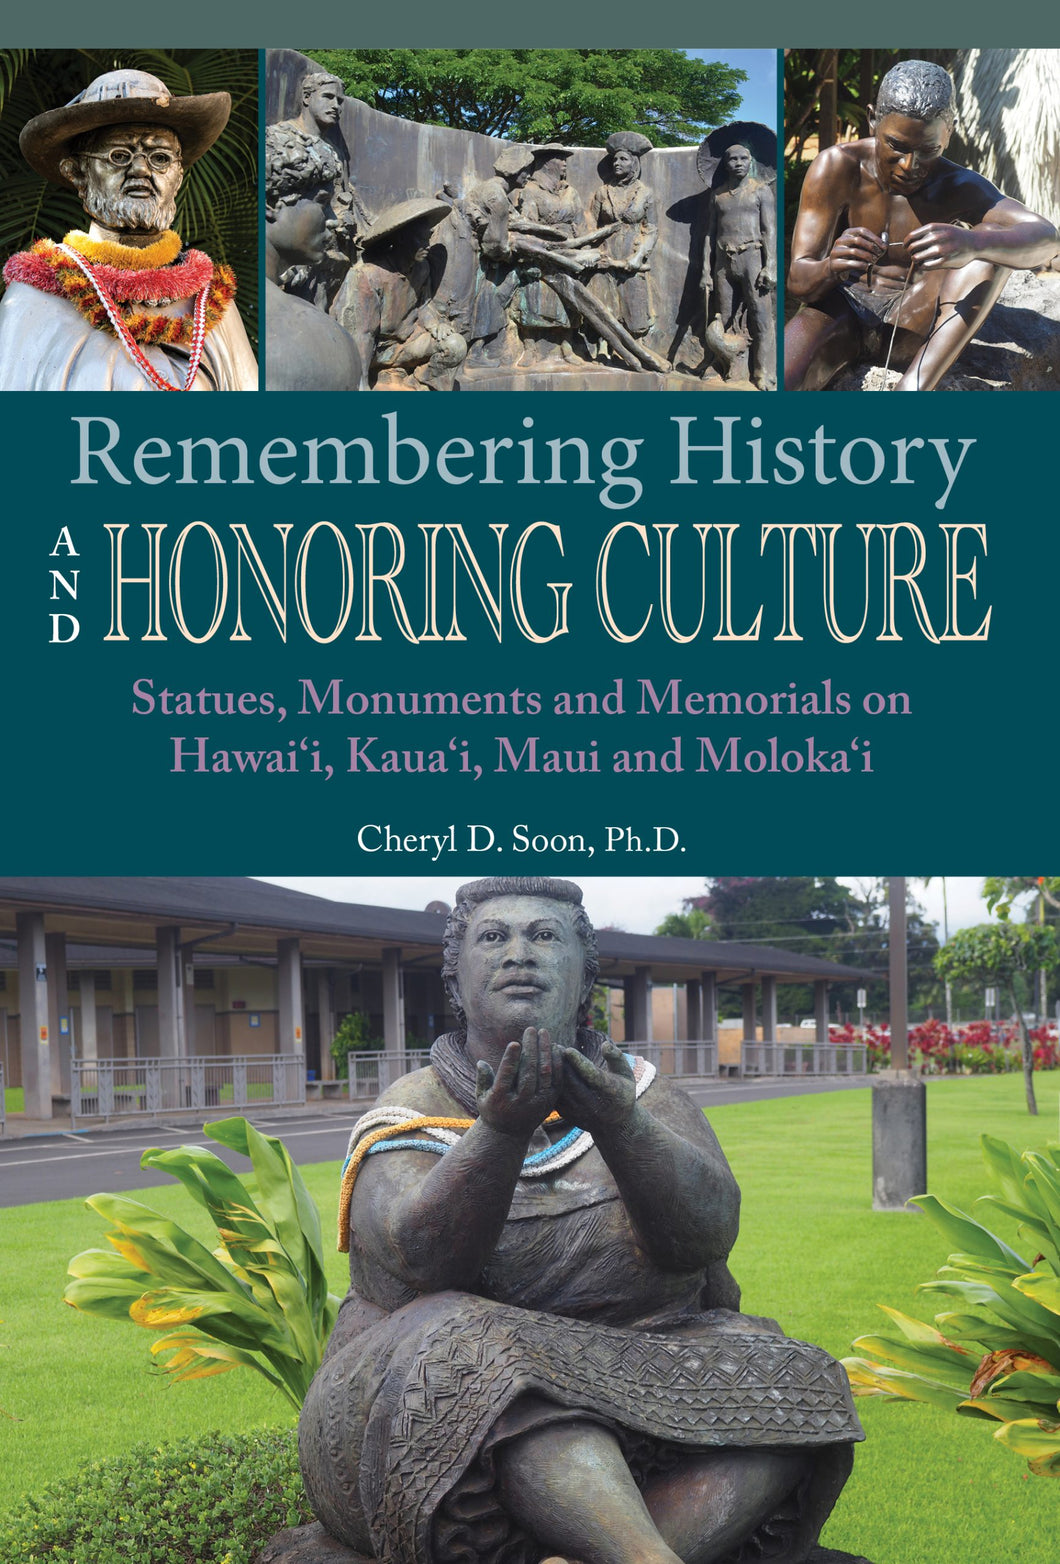 Remembering History and Honoring Culture